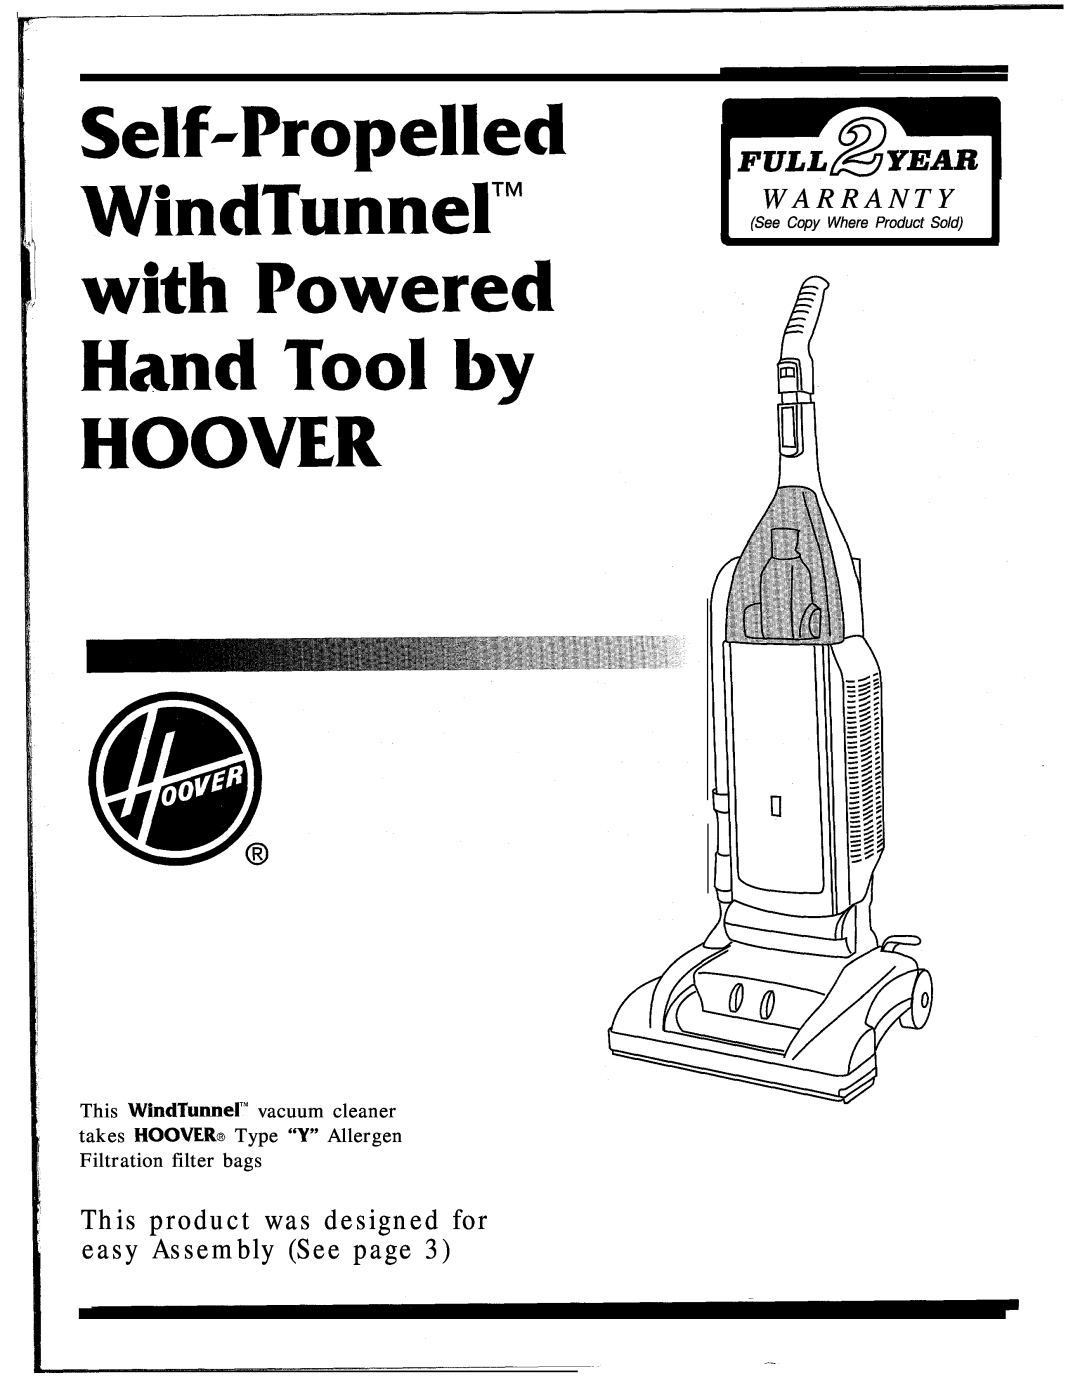 Hoover warranty Self-Propelled WindTunnel’” with Powered Hand Tool by HOOVER, Warranty, See Copy Where Product Sold 